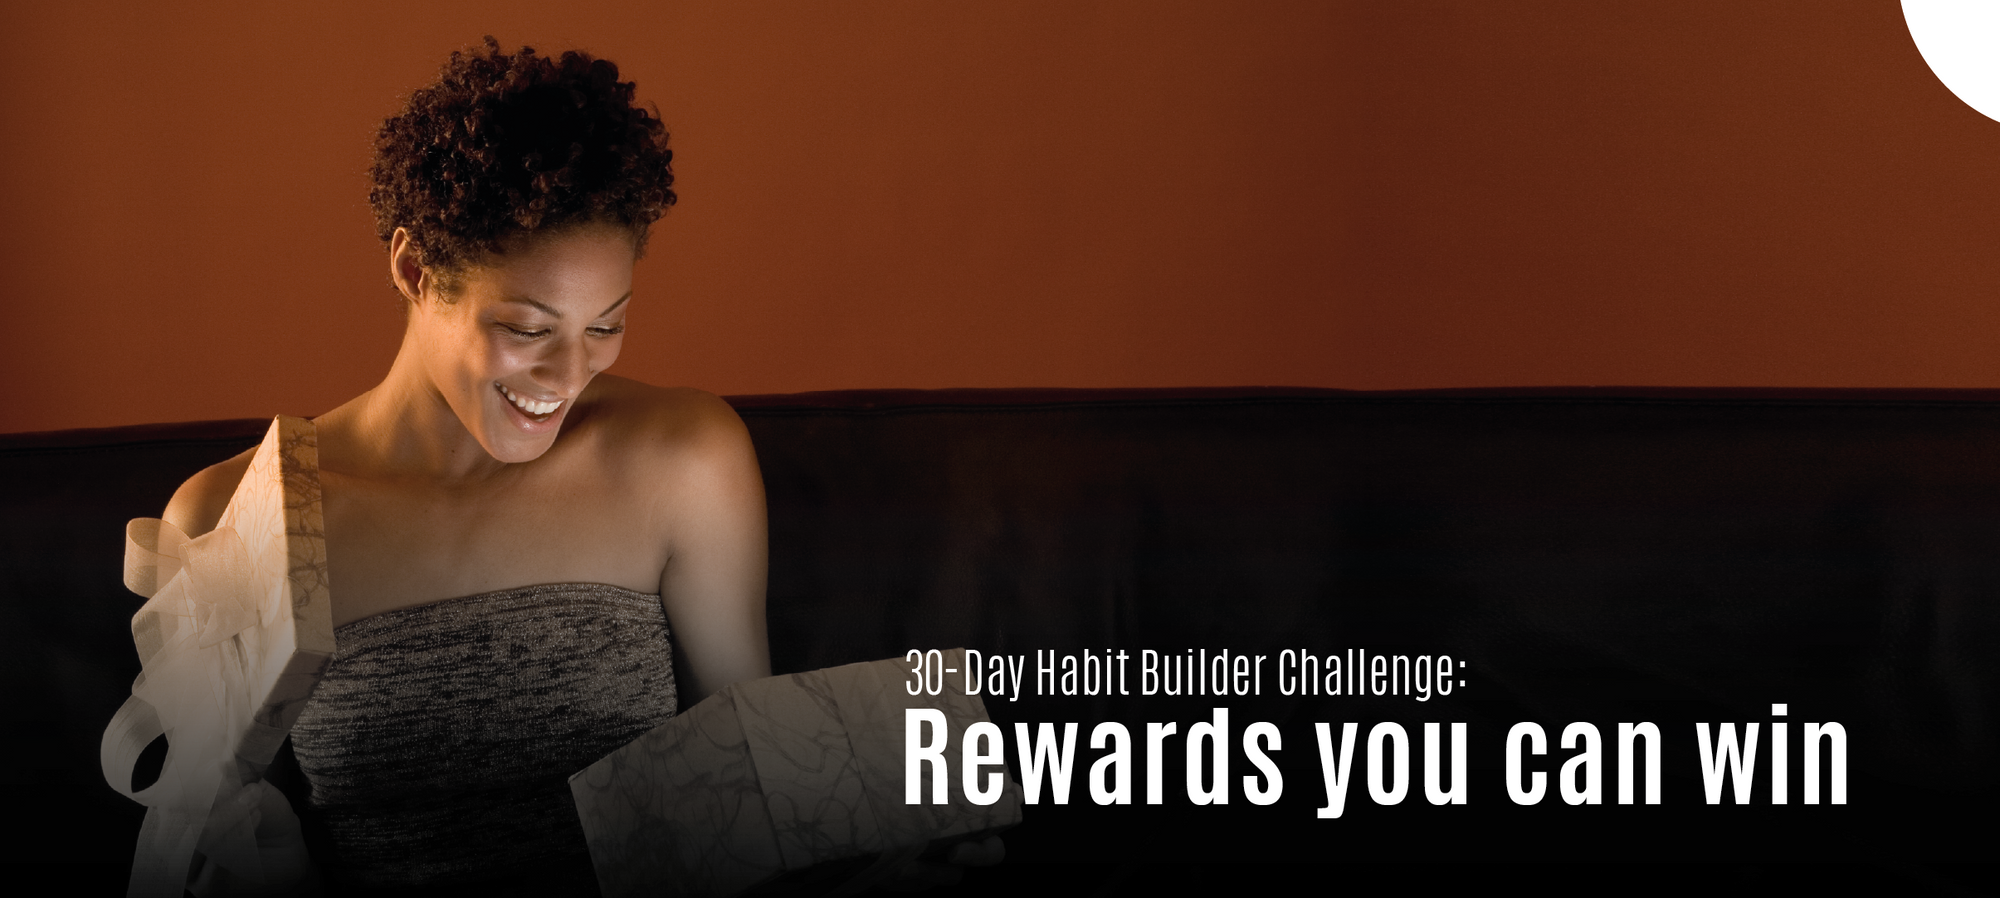 Work out and win exciting rewards! 